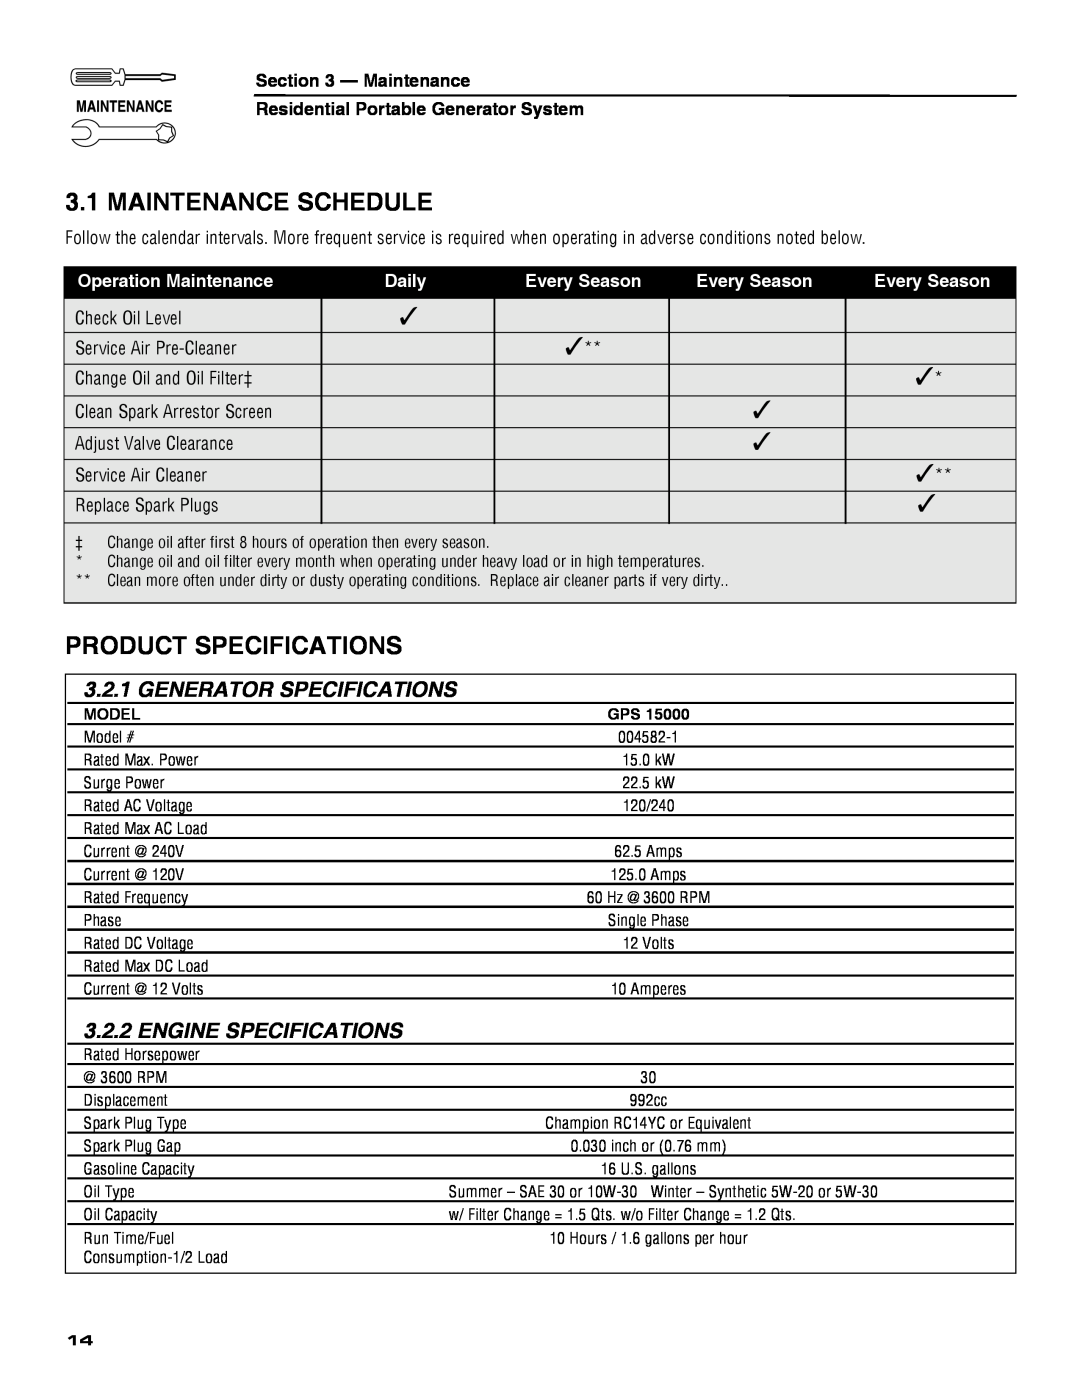 Guardian Technologies 5209 Maintenance Schedule, Product Specifications, Generator Specifications, Engine Specifications 